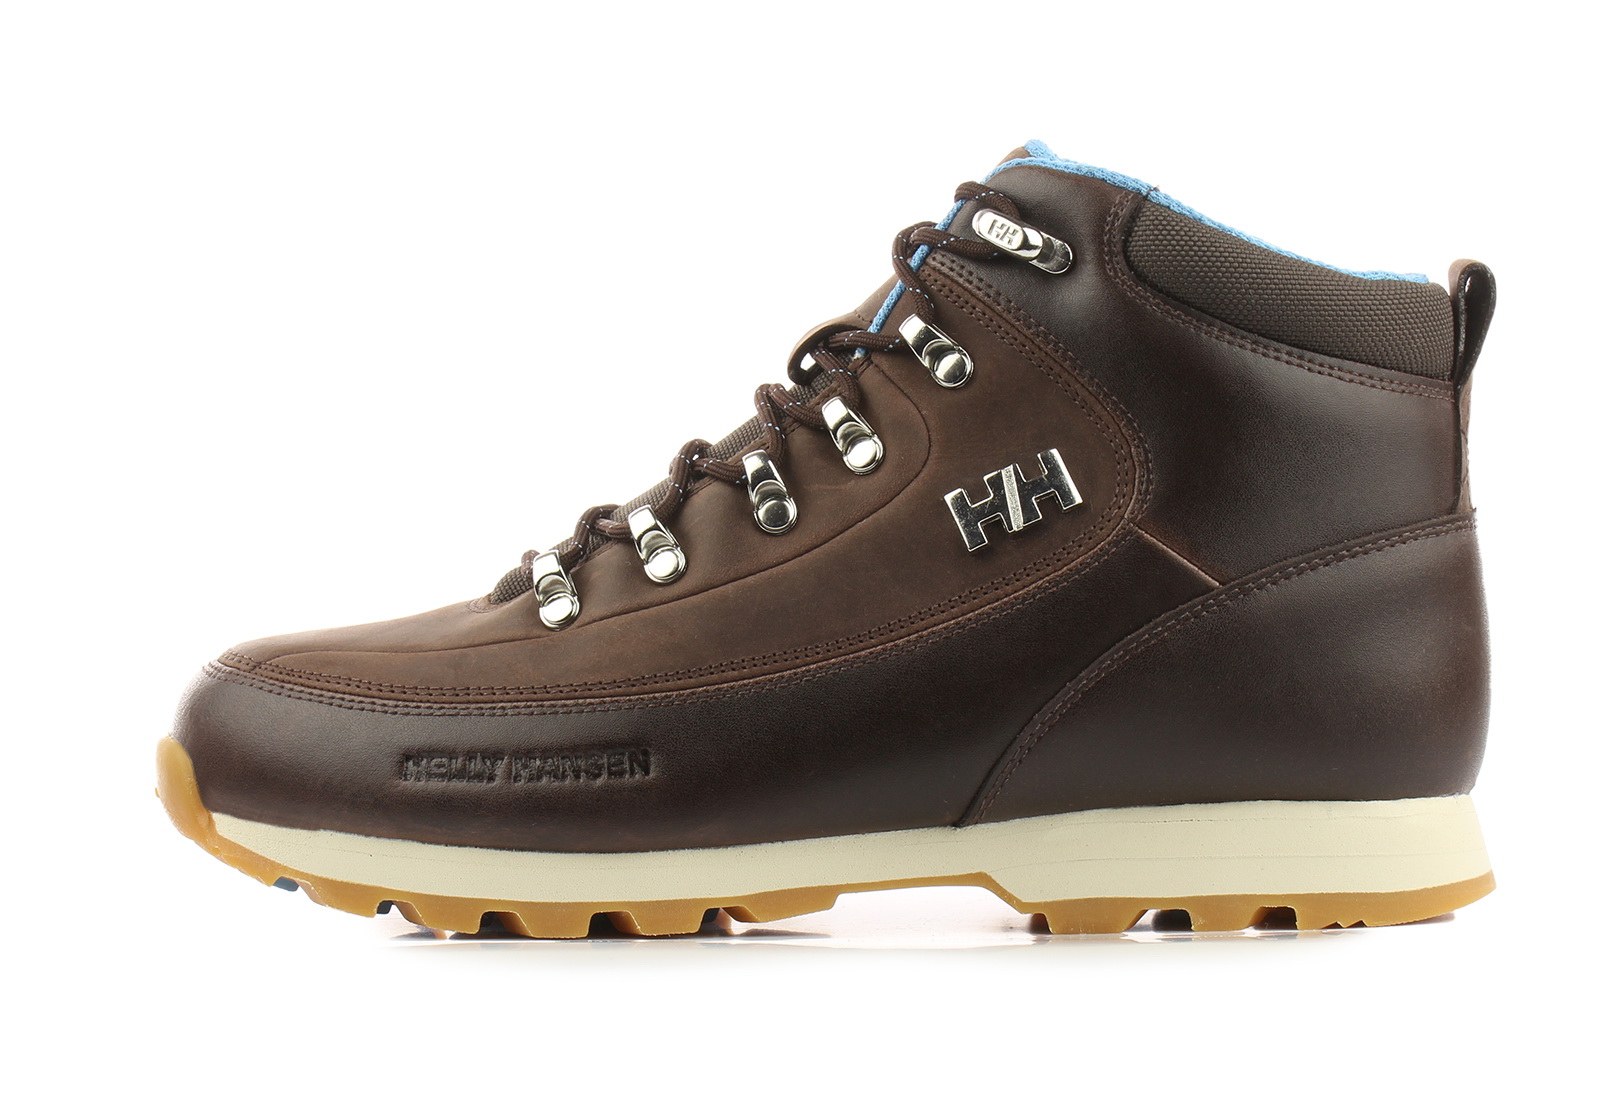 Mechanics radium Outlaw Helly Hansen Hikers - W The Forester - 10516-709 - Online shop for  sneakers, shoes and boots